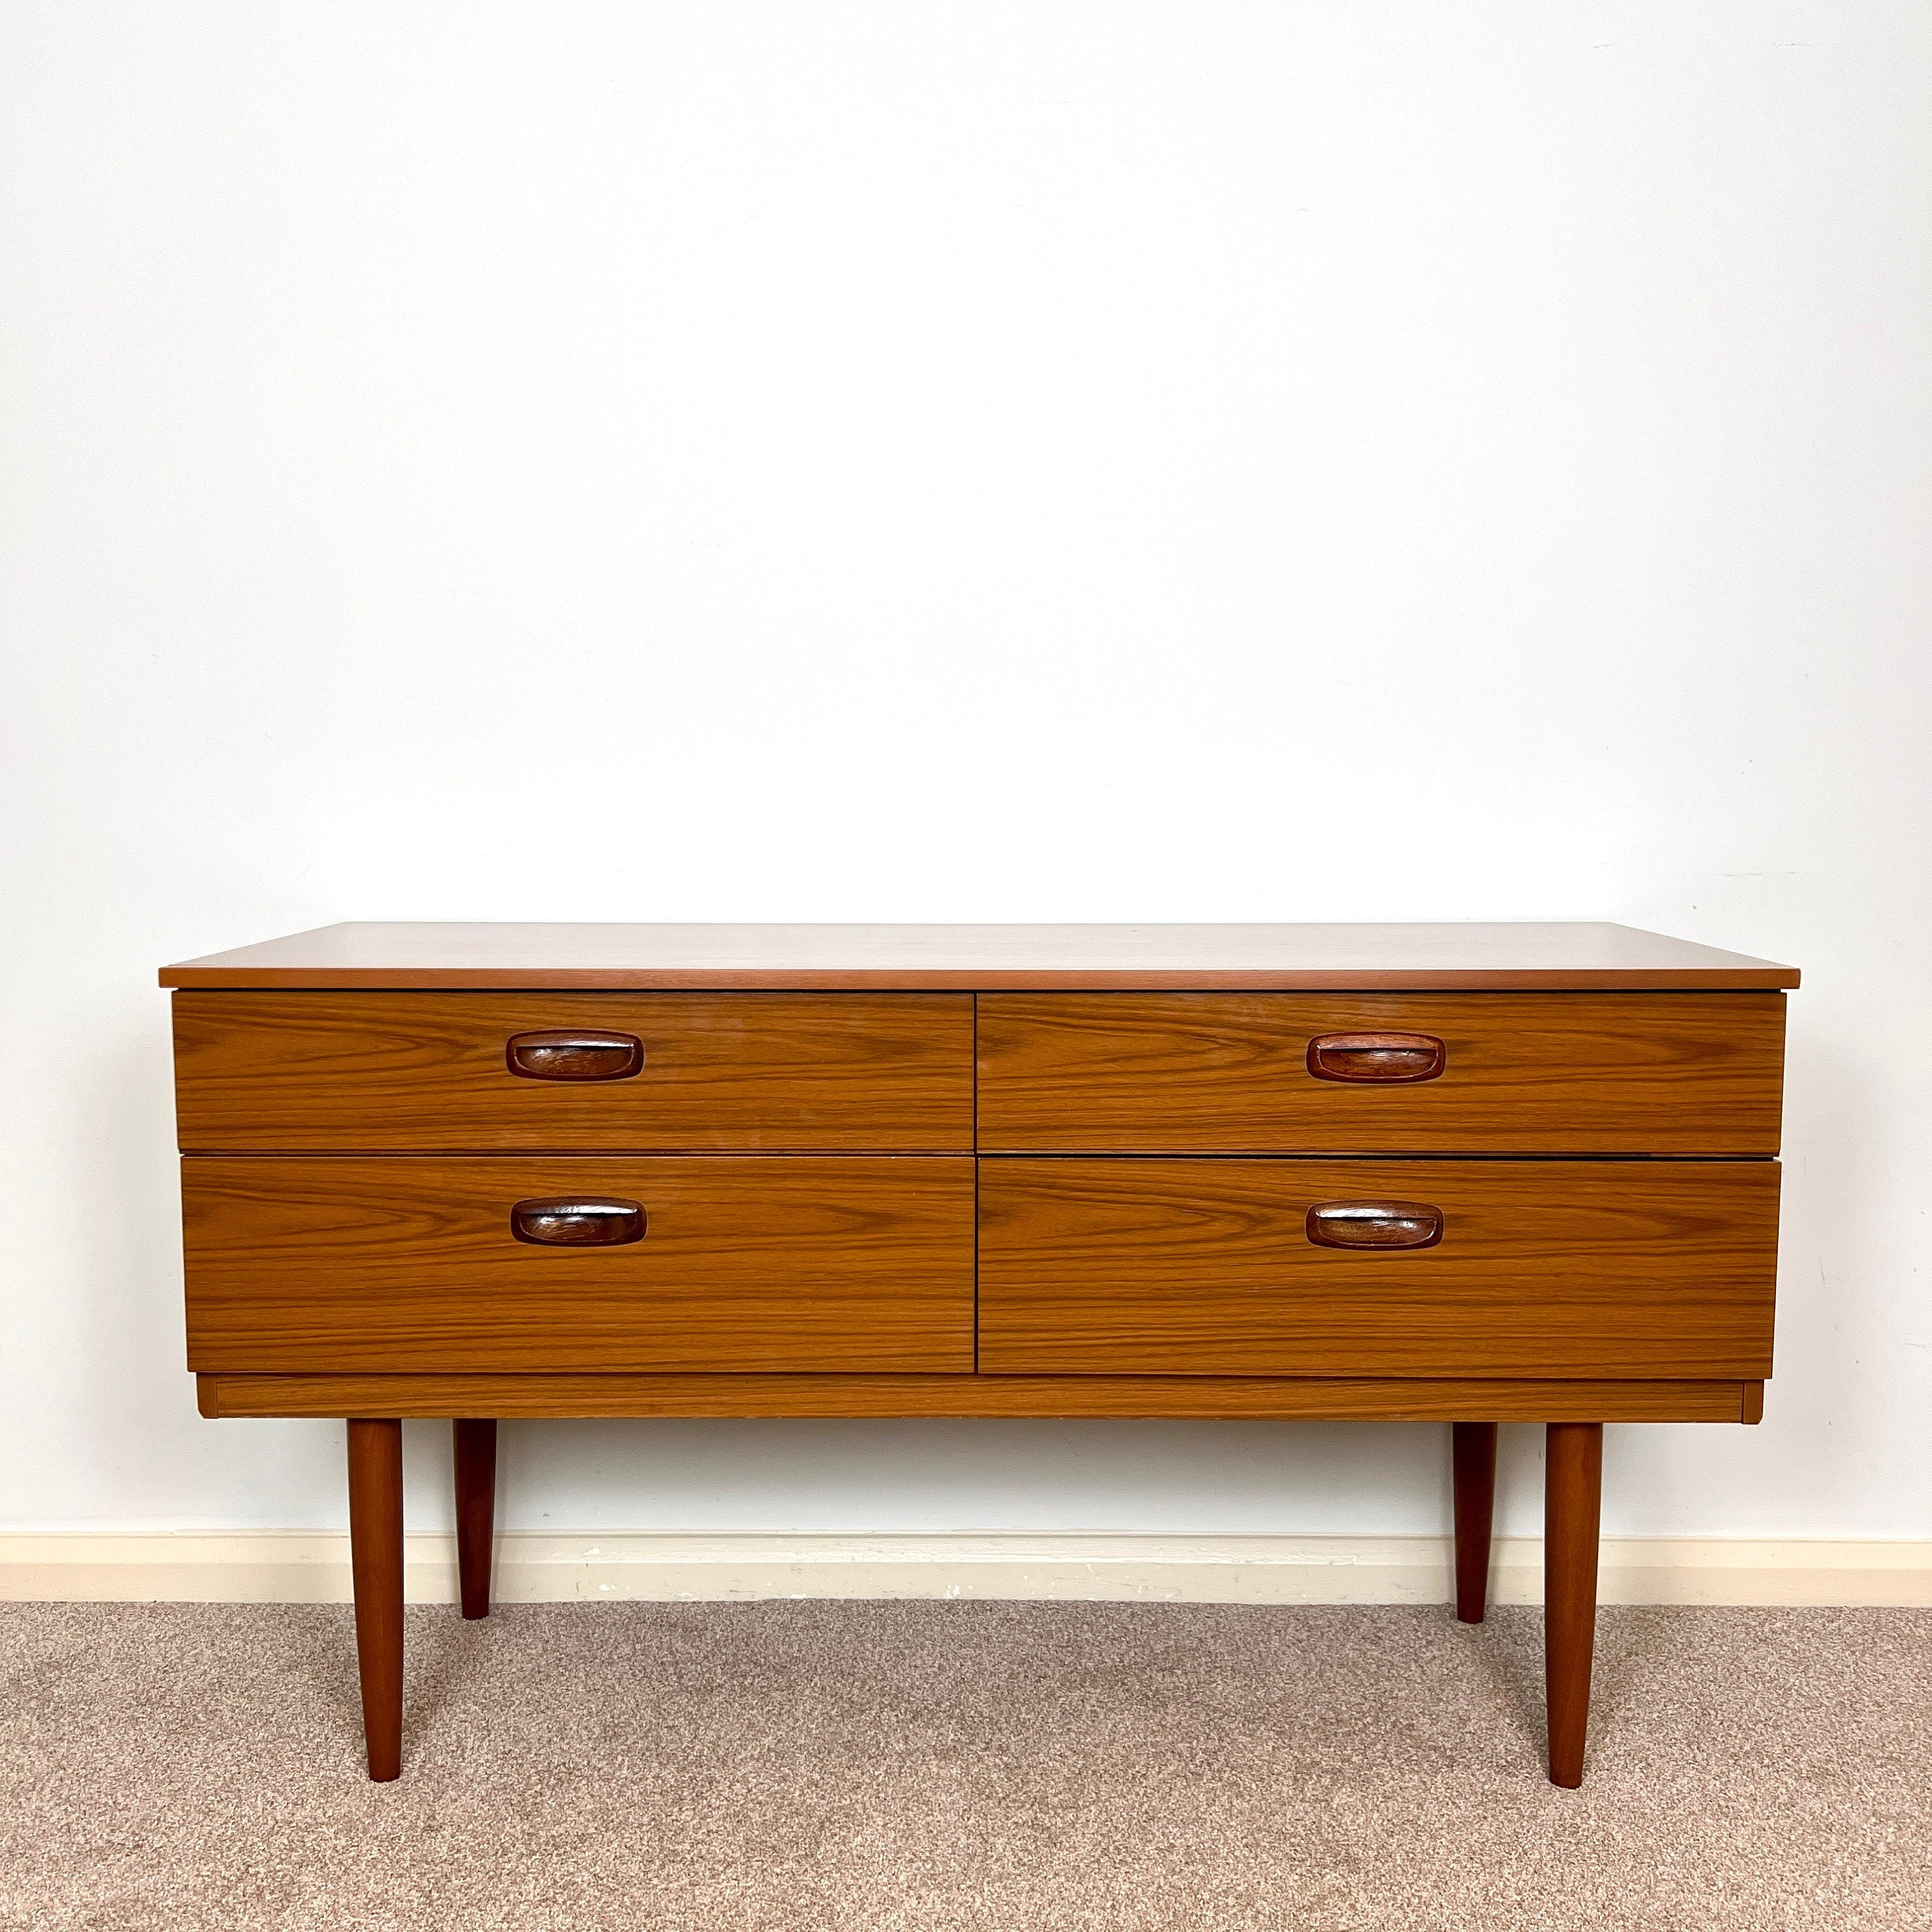 Mid Century Teak Effect Sideboard with Drawers